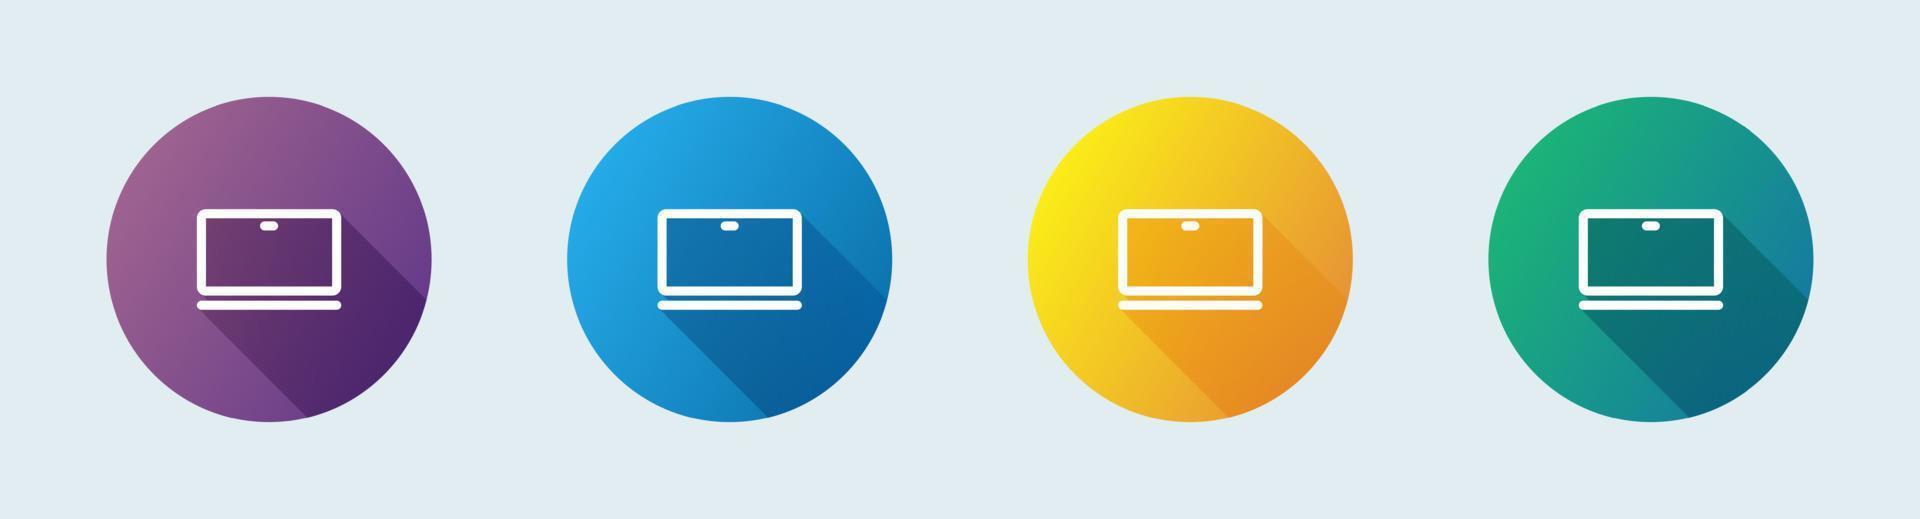 Laptop line icon in flat design style. Notebook signs vector illustration.